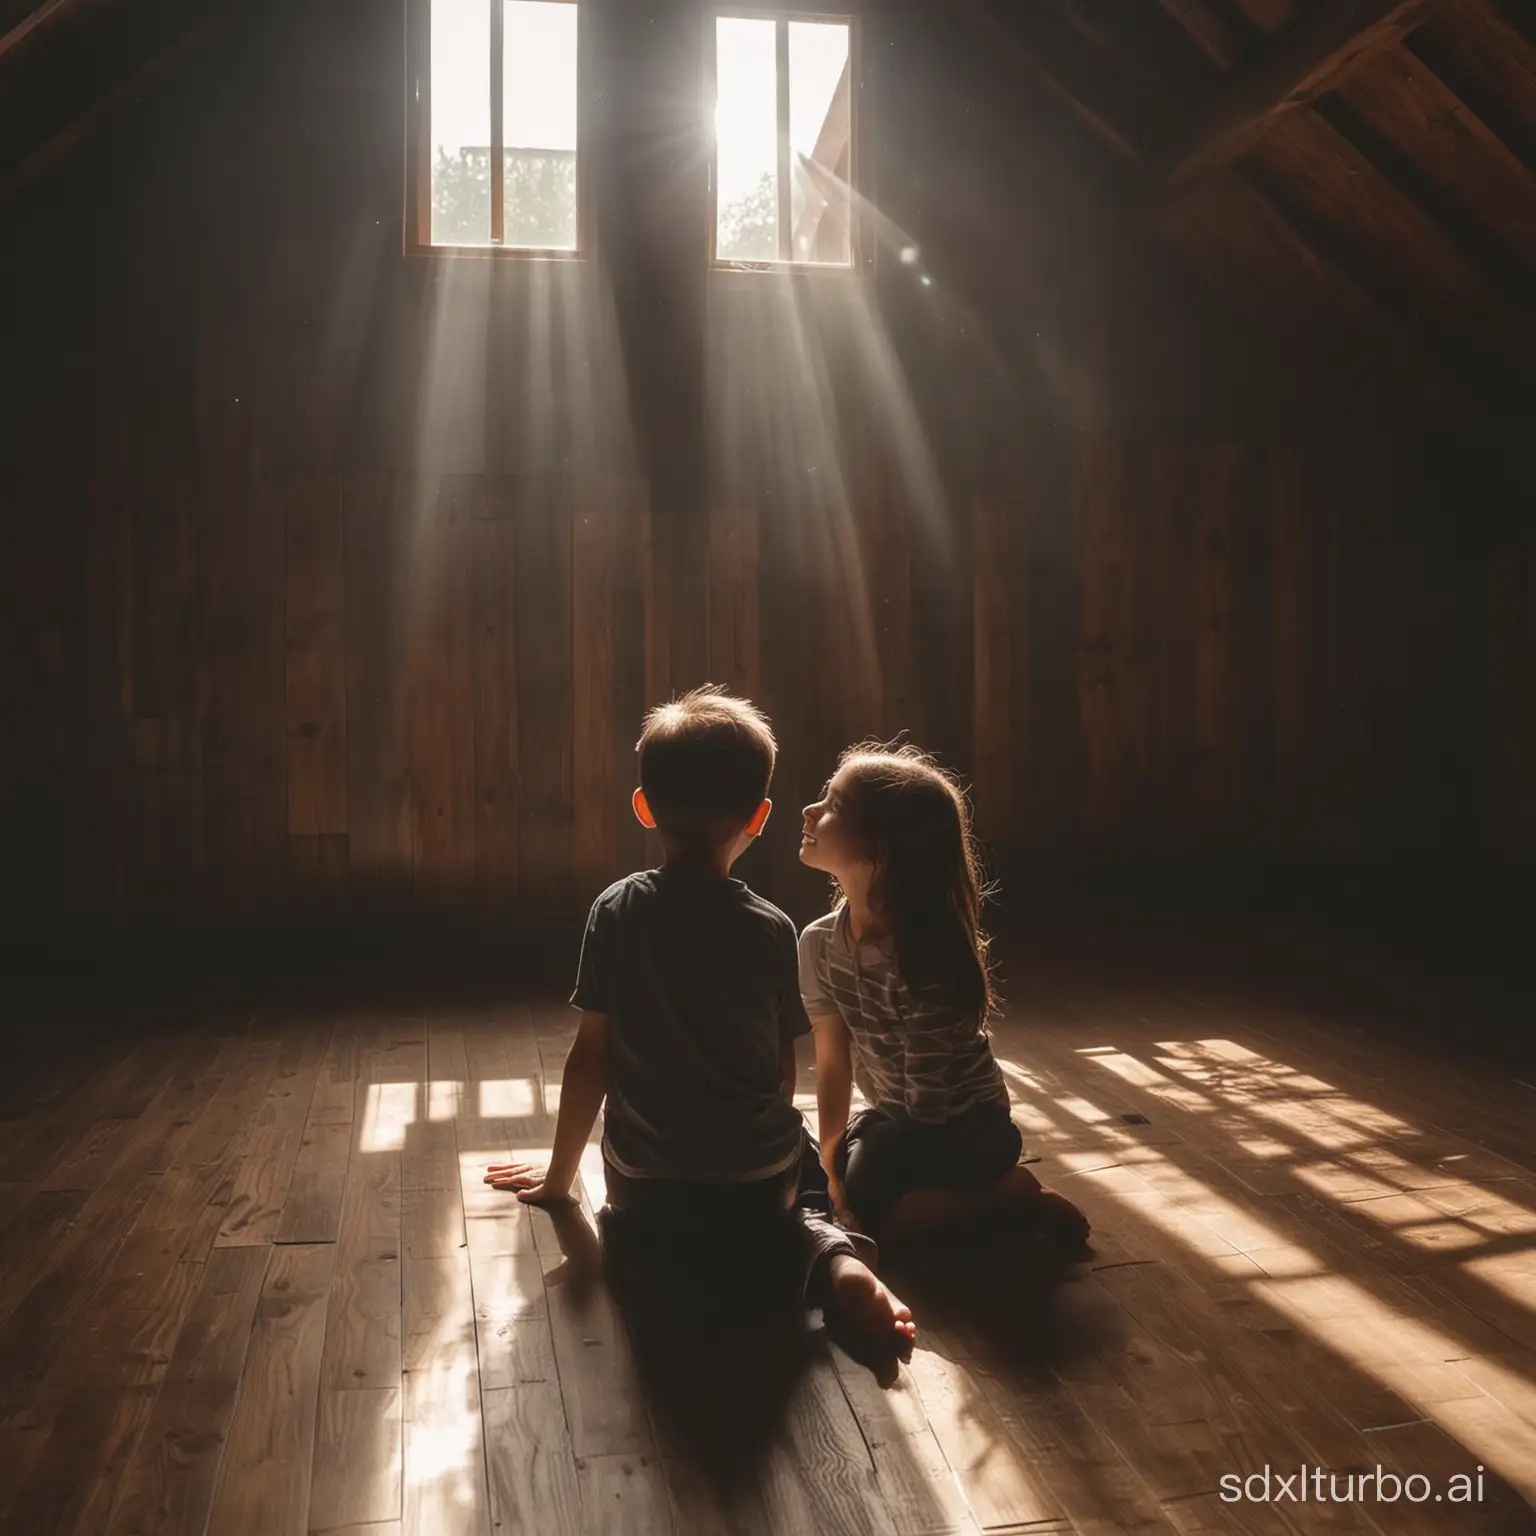 Children-Sitting-by-Wooden-House-in-Sunlit-Room